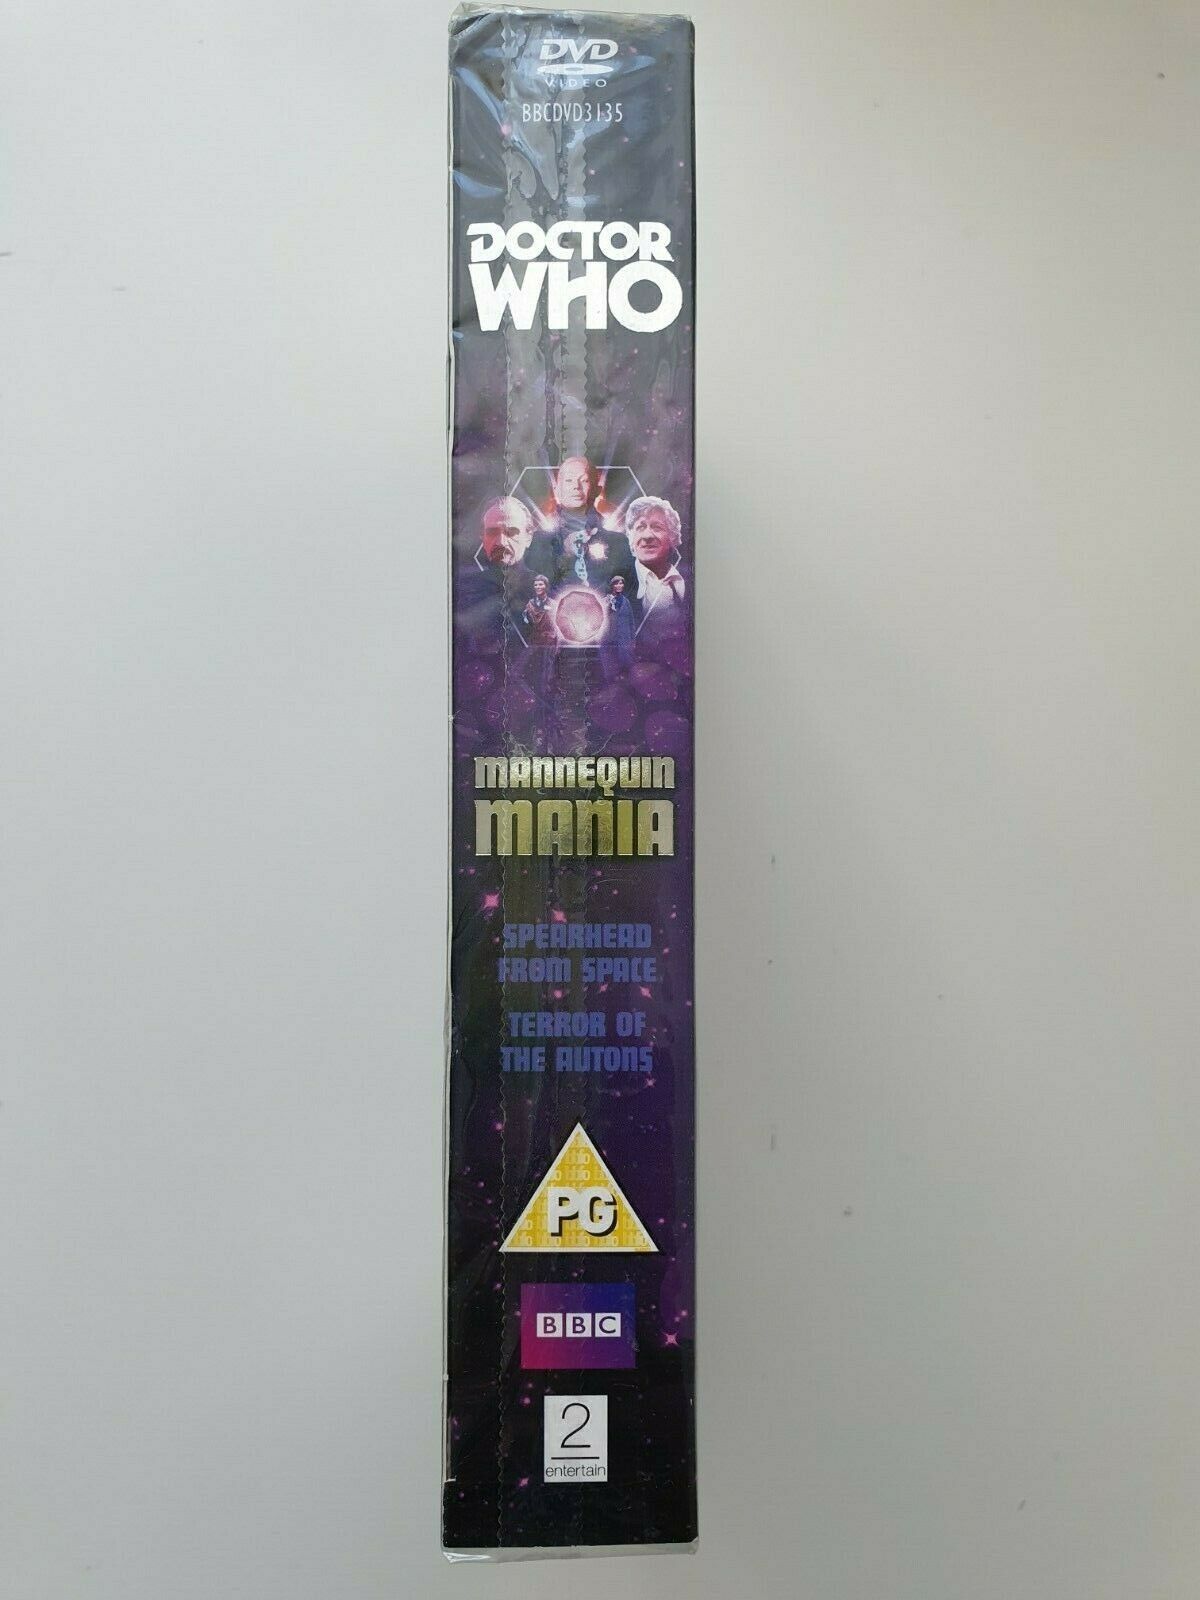 5051561031359 Doctor Who - Mannequin Mania (DVD, 2011) 2 disc set English BOX SET NEW SEALED